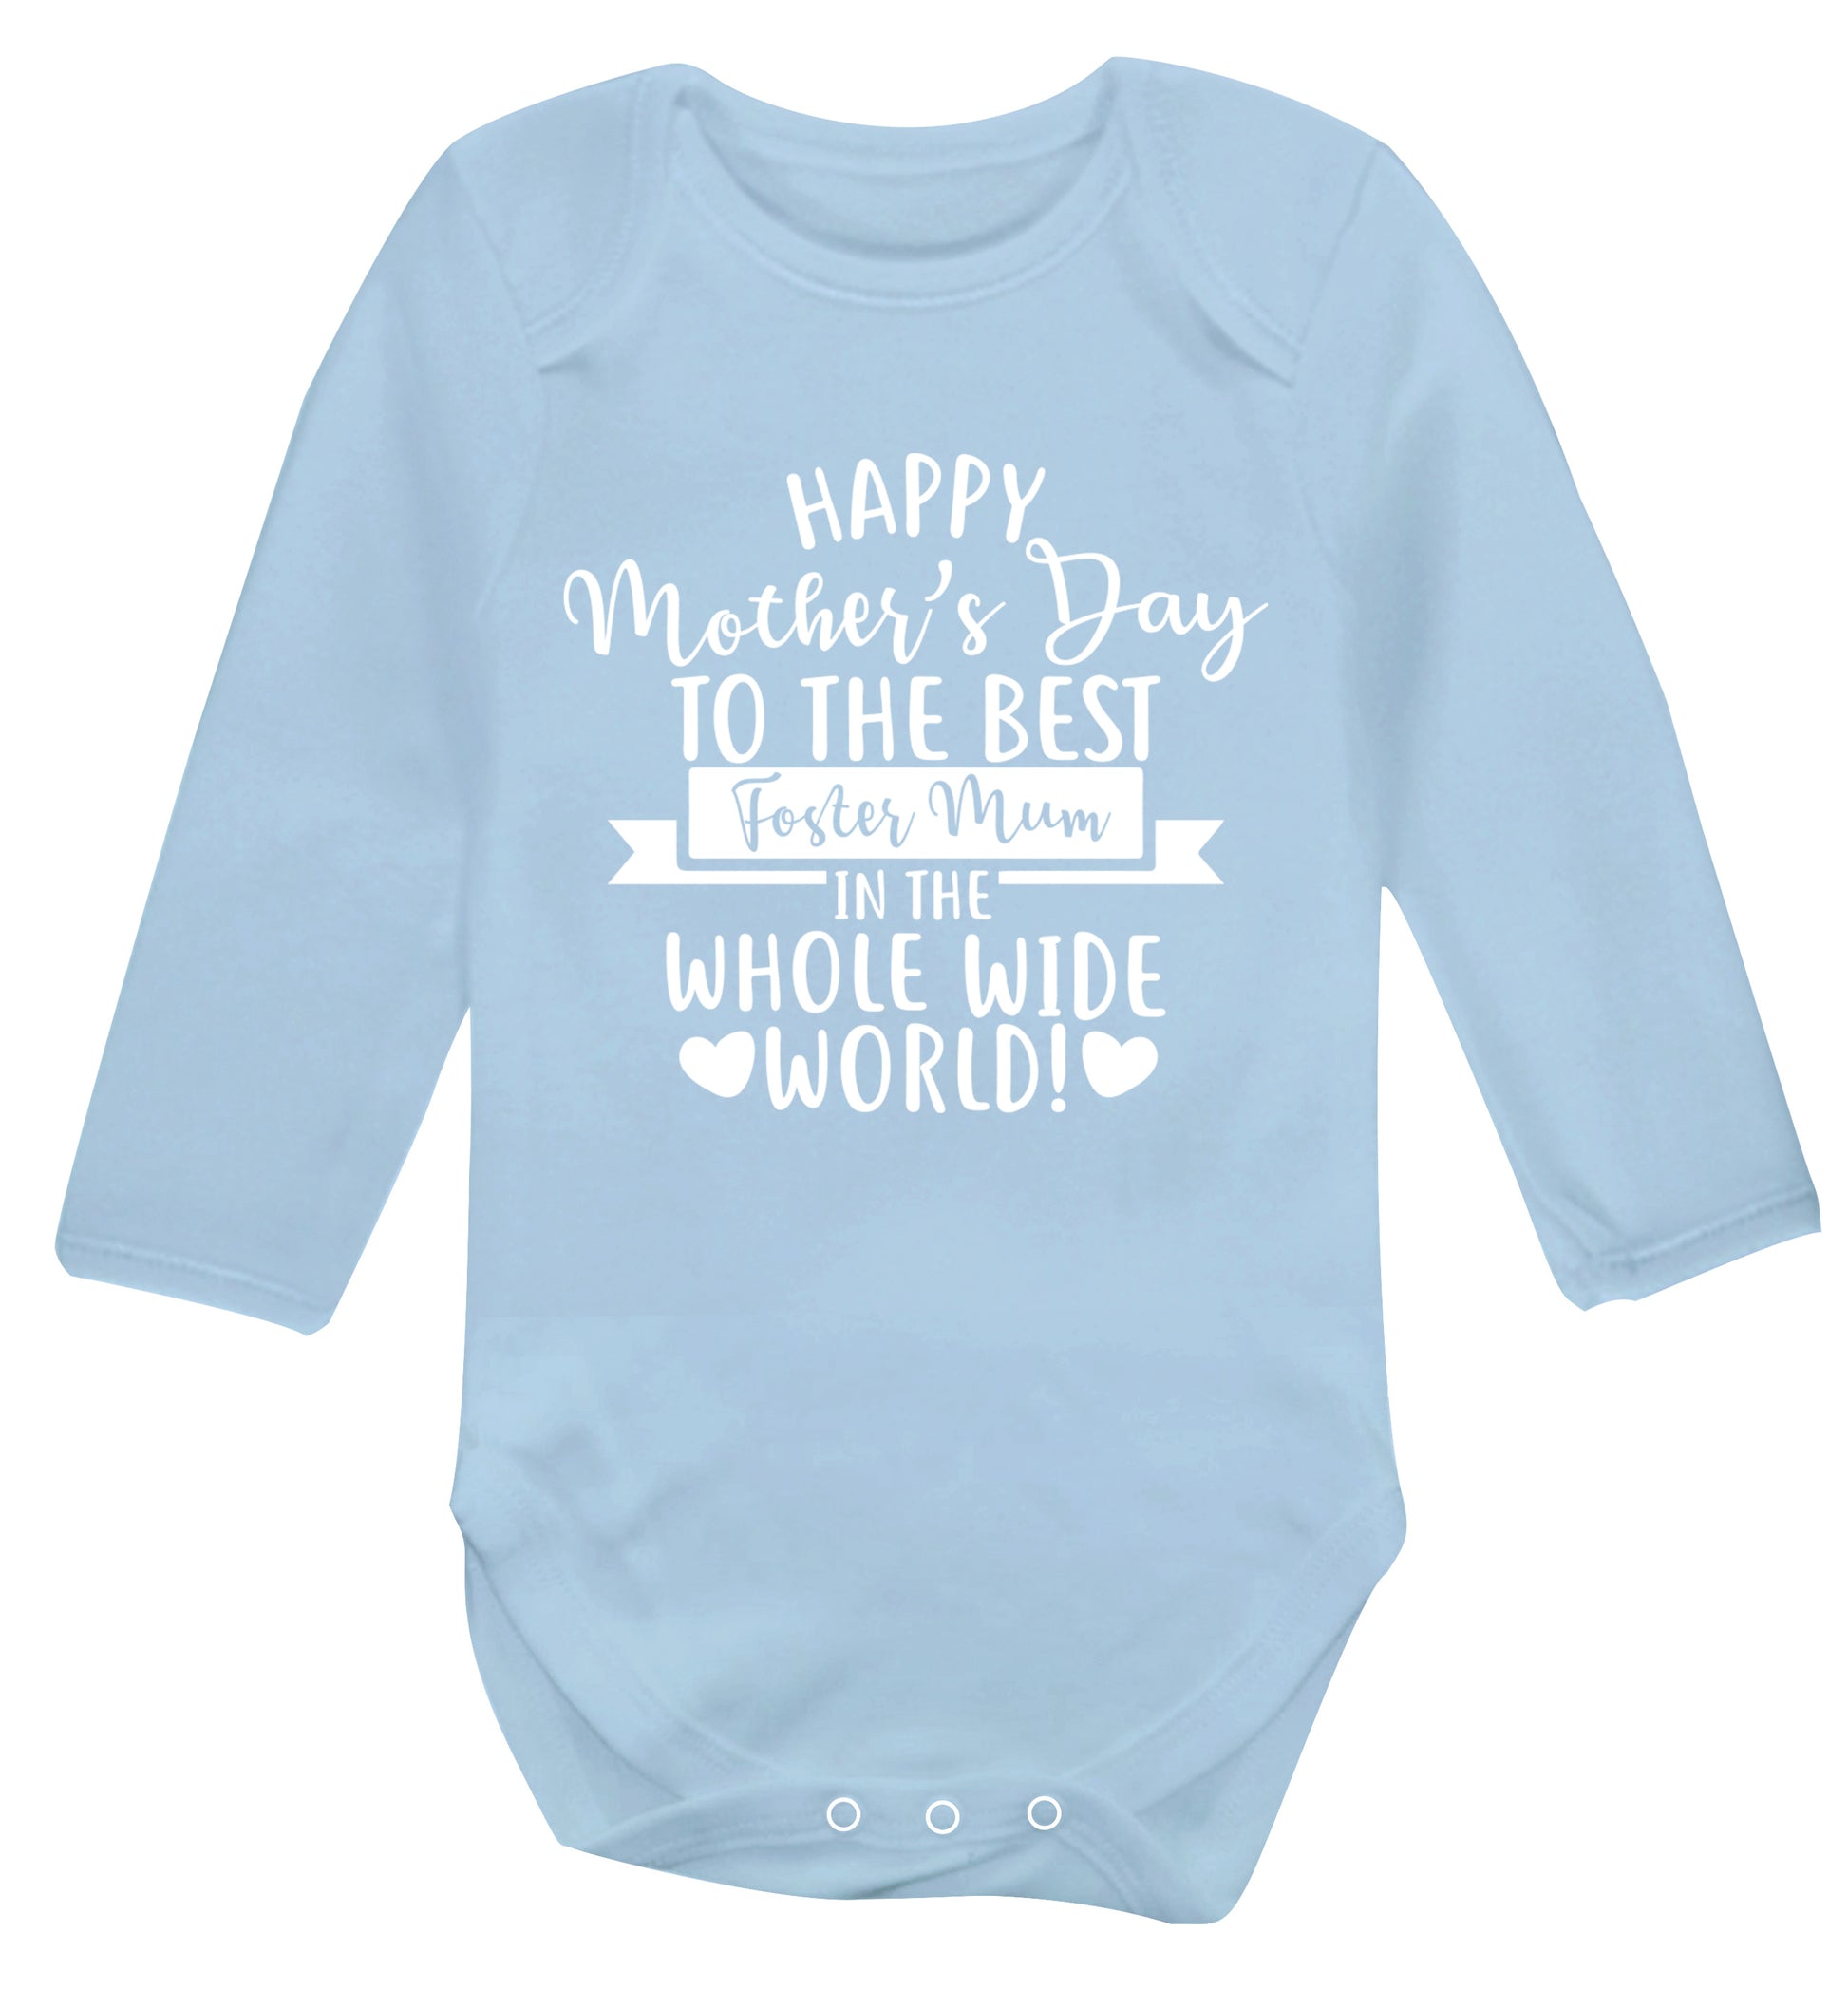 Happy mother's day to the best foster mum in the world Baby Vest long sleeved pale blue 6-12 months